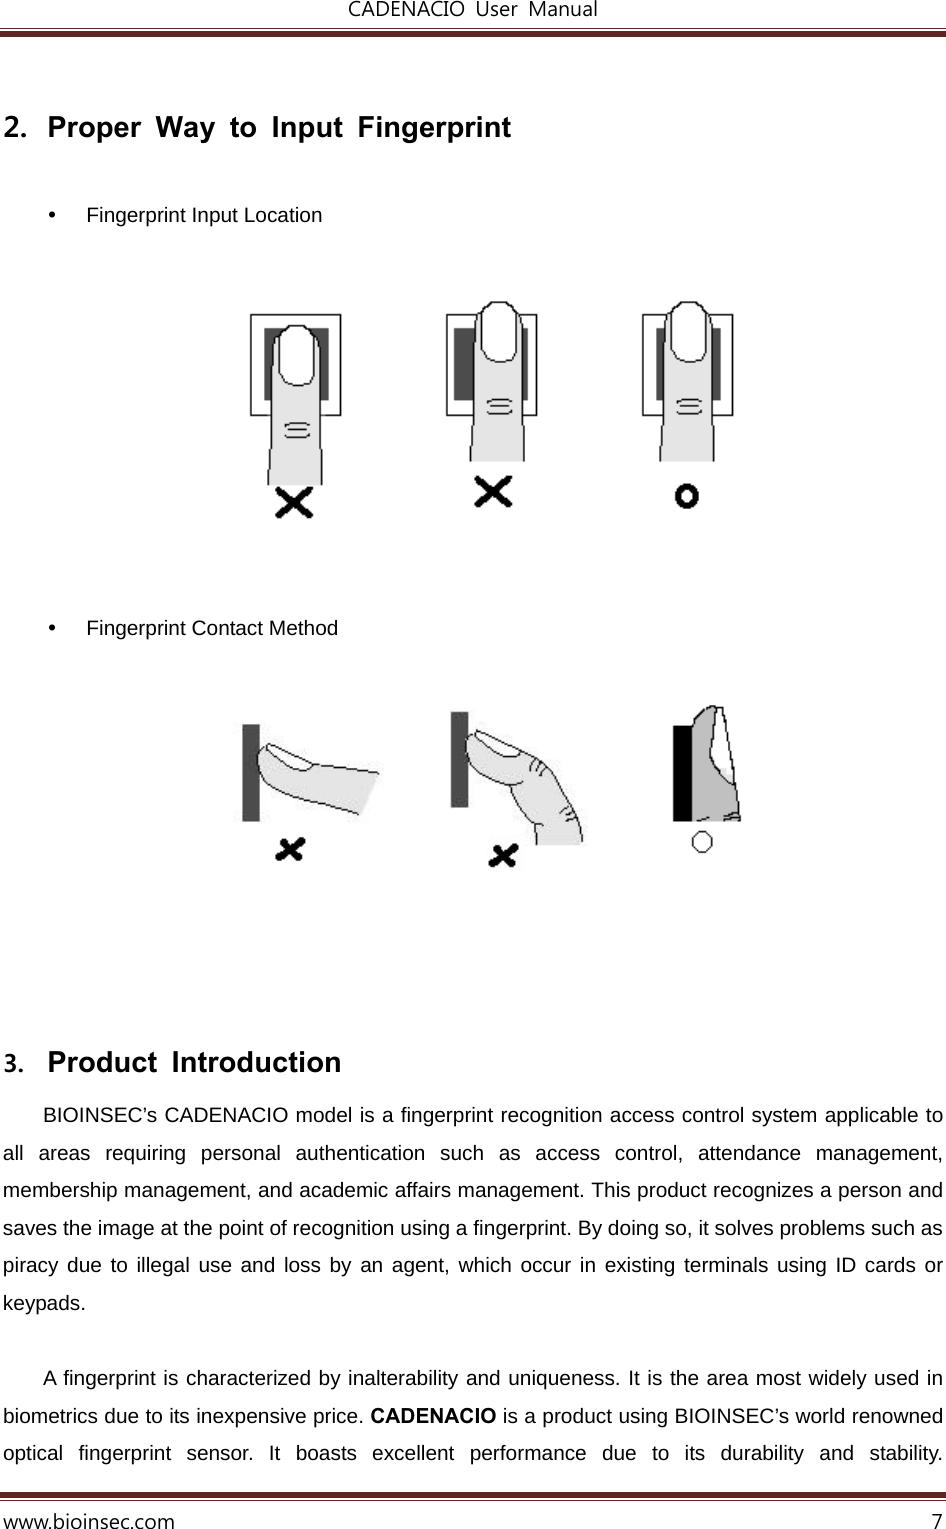 CADENACIO  User  Manual  www.bioinsec.com 7  2.  Proper Way to Input Fingerprint    Fingerprint Input Location               Fingerprint Contact Method           3. Product Introduction  BIOINSEC’s CADENACIO model is a fingerprint recognition access control system applicable to all areas requiring personal authentication such as access control, attendance management, membership management, and academic affairs management. This product recognizes a person and saves the image at the point of recognition using a fingerprint. By doing so, it solves problems such as piracy due to illegal use and loss by an agent, which occur in existing terminals using ID cards or keypads.   A fingerprint is characterized by inalterability and uniqueness. It is the area most widely used in biometrics due to its inexpensive price. CADENACIO is a product using BIOINSEC’s world renowned optical fingerprint sensor. It boasts excellent performance due to its durability and stability.  